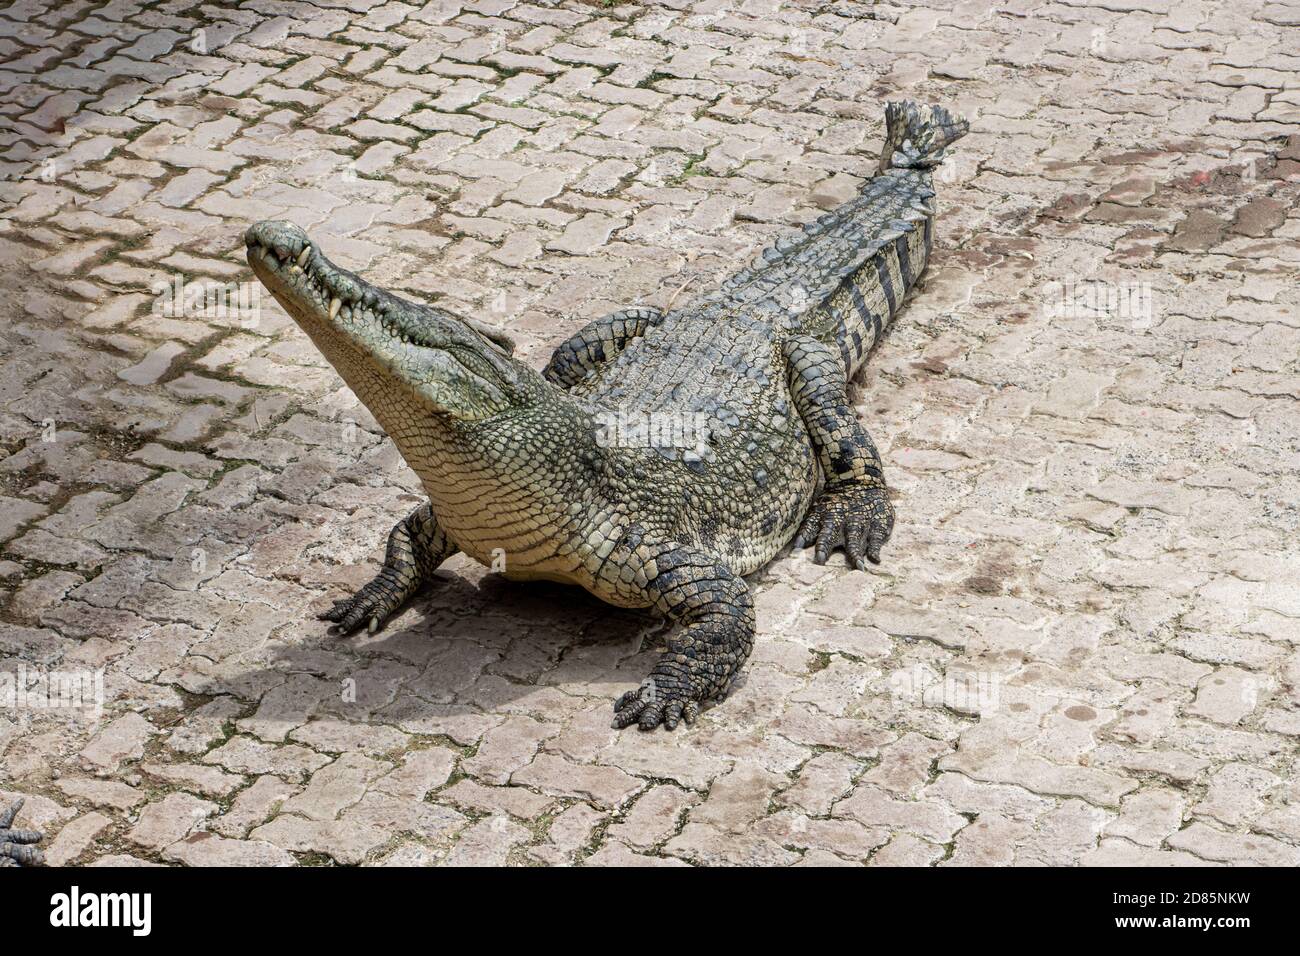 A crocodile stands on the pavement with its head held up. Stock Photo